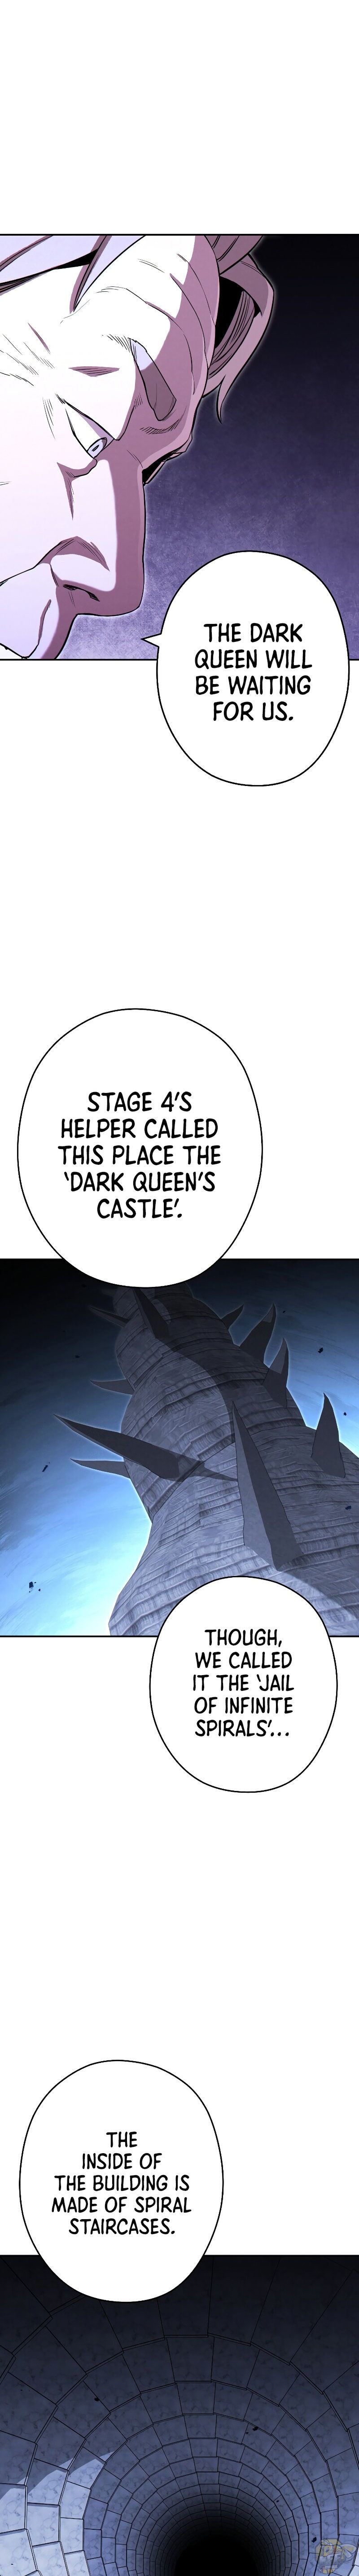 Dungeon Reset Chapter 97 - MyToon.net